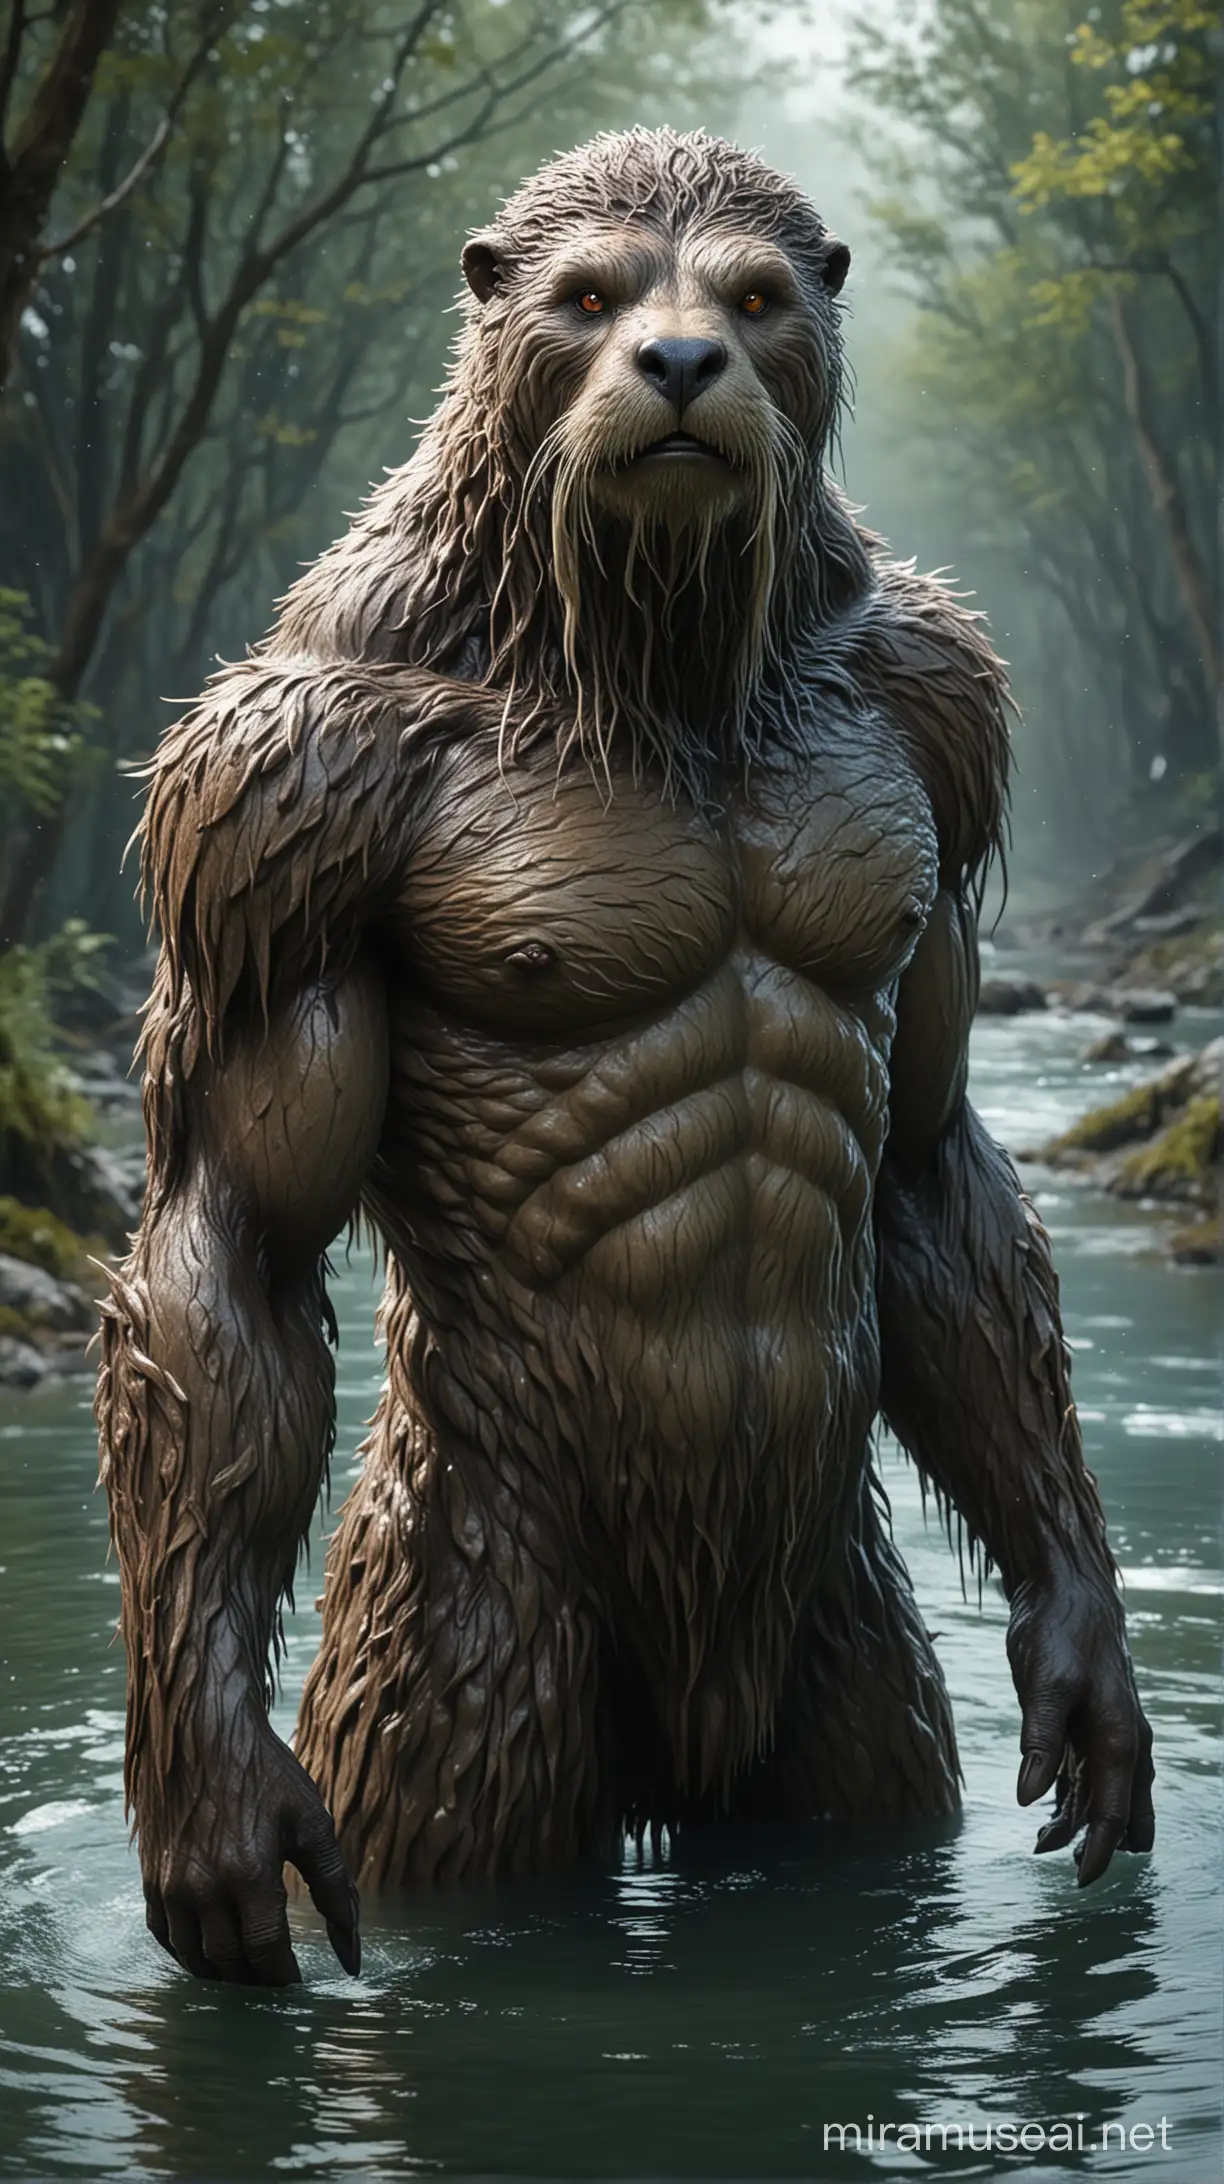 an otter man with a big body and a big face 
half in the water, face looking front, humanoid creature, creature concept art, an ancient creature, swamp monster of ice, ancient creature, realistic creature concept, beastman concept, creature design, river god, gnoll, creature god, stunning sasquatch, beautiful hairy humanoids, anthropomorphic creature,